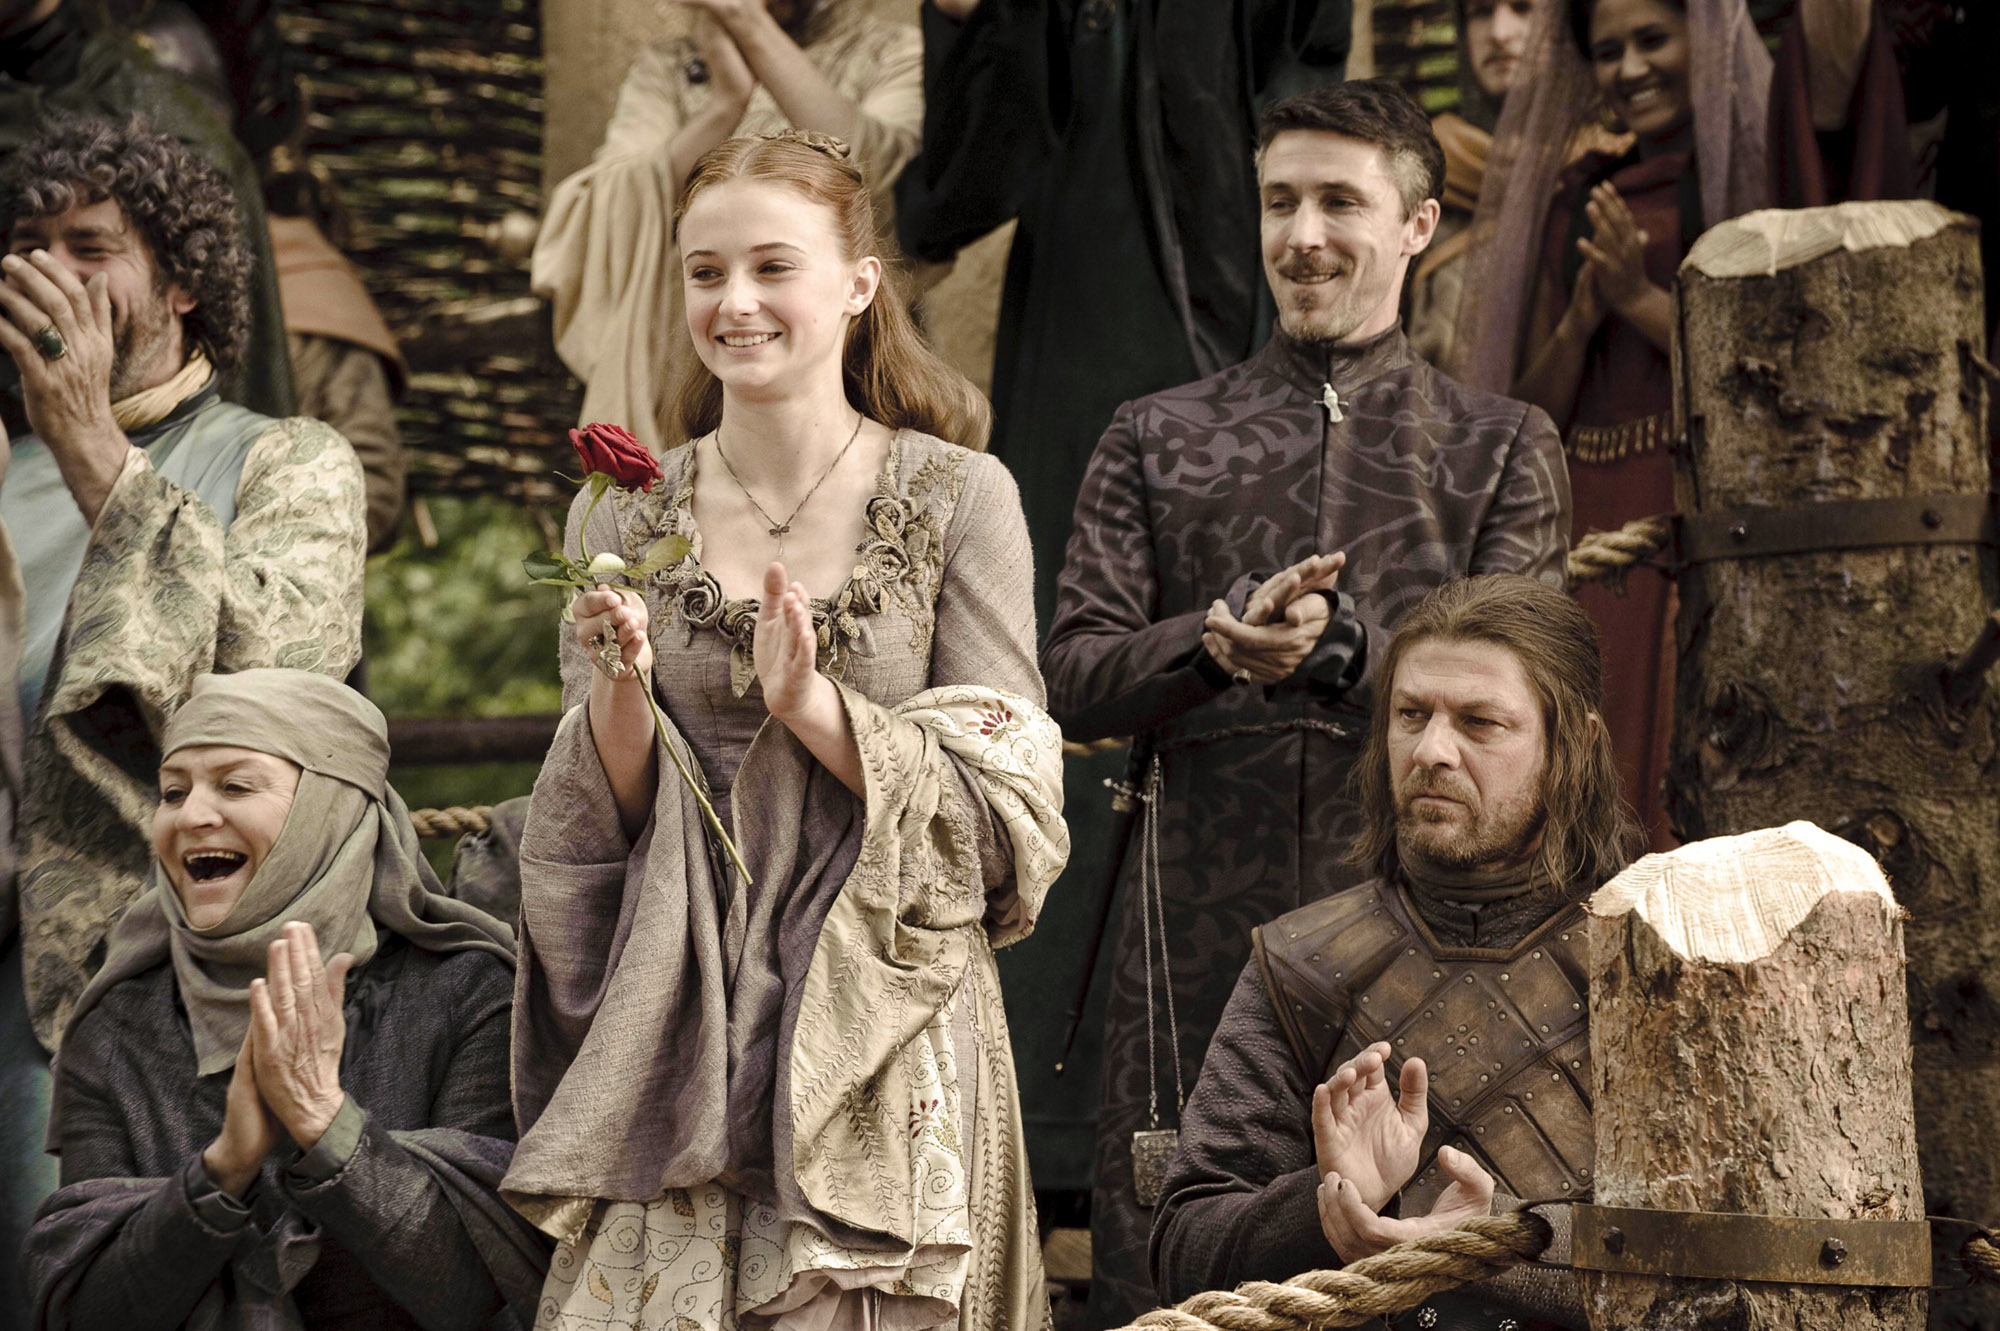 game of throne season 5 release date